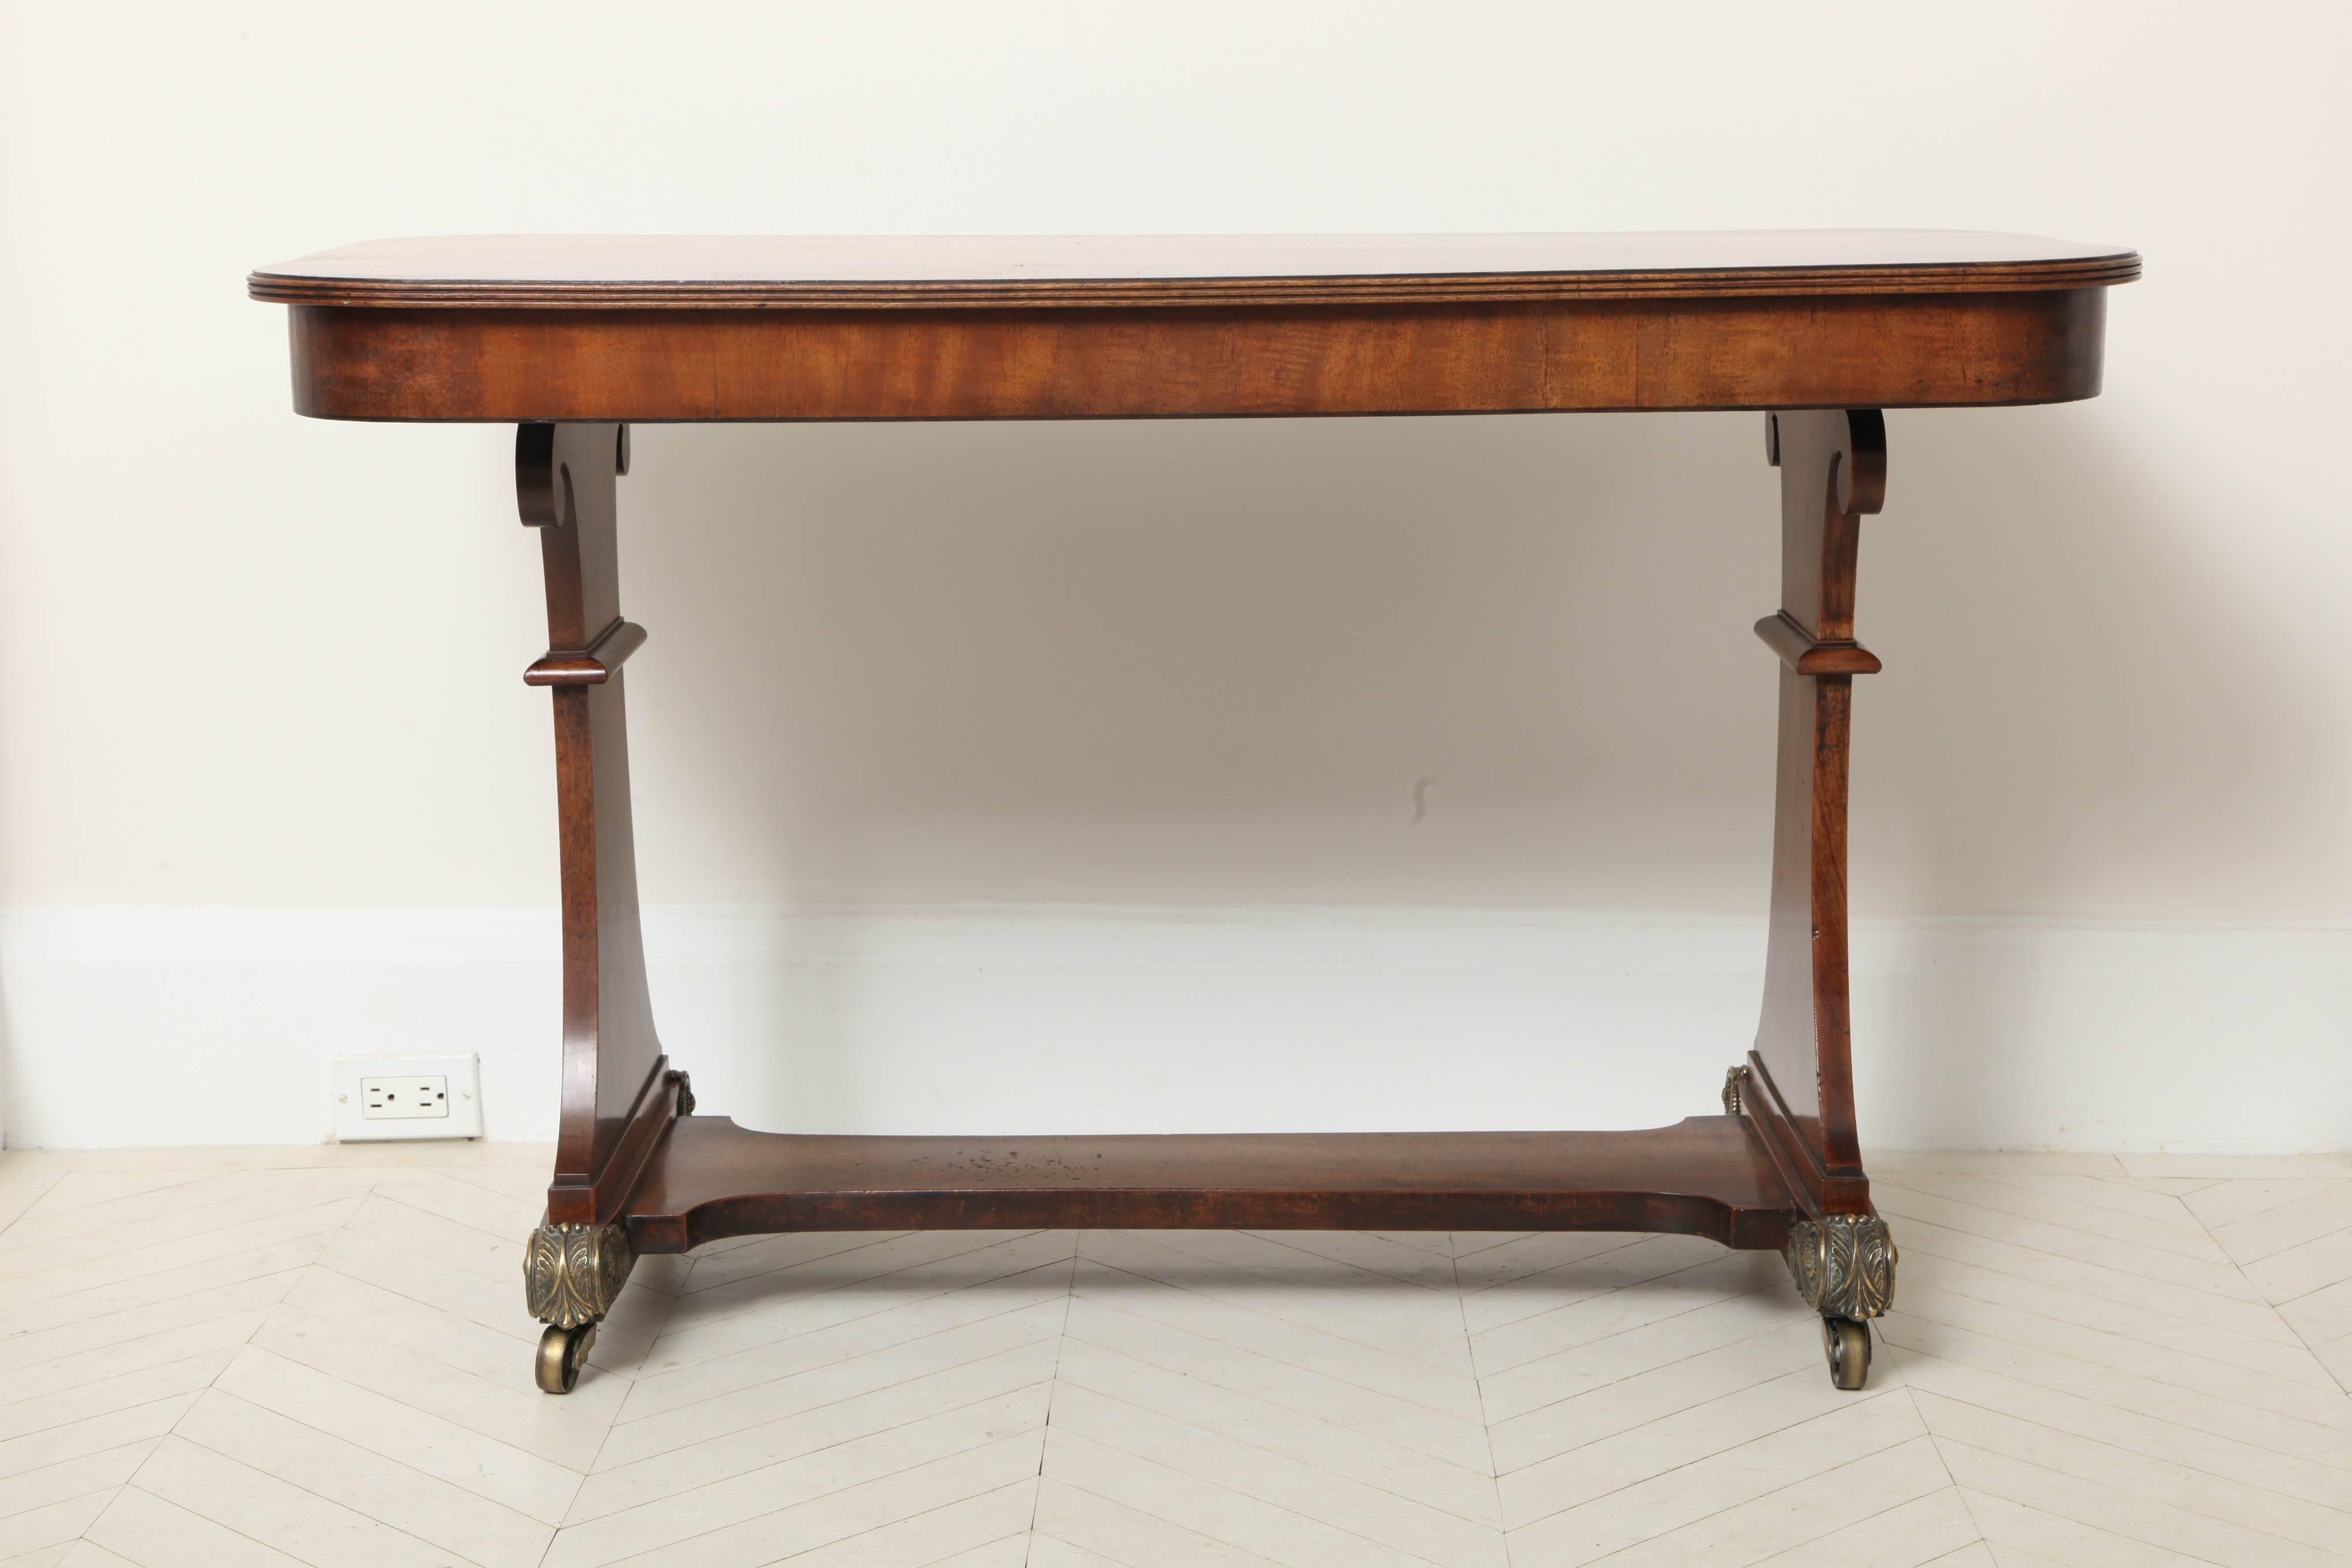 An English Regency faded mahogany center table with frieze drawer and lower stretcher on ormolu-mounted casters, circa 1820